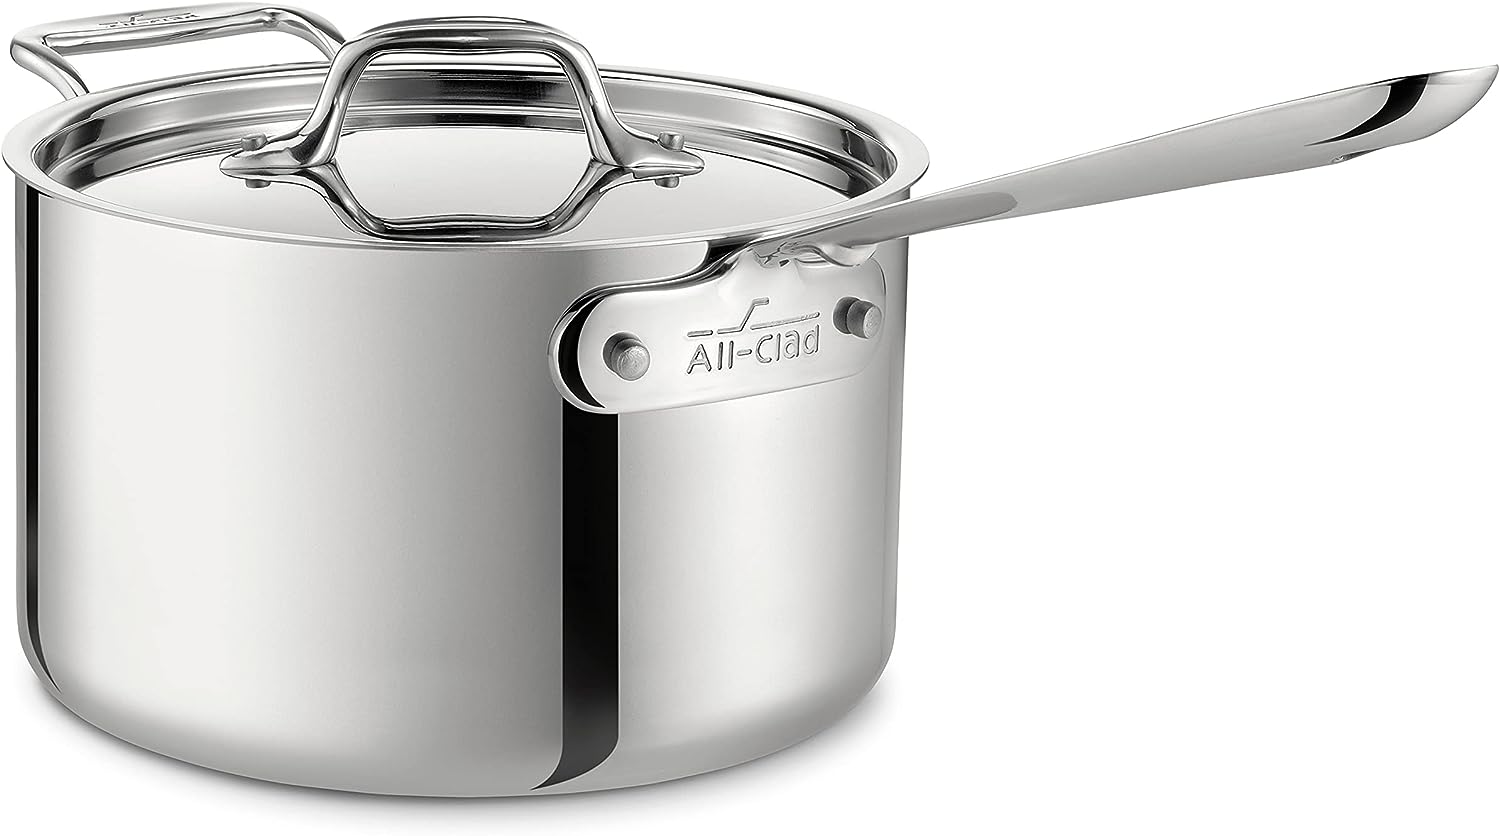 All-Clad D3 3-Ply Stainless Steel Sauce Pan with Lid 4 Quart